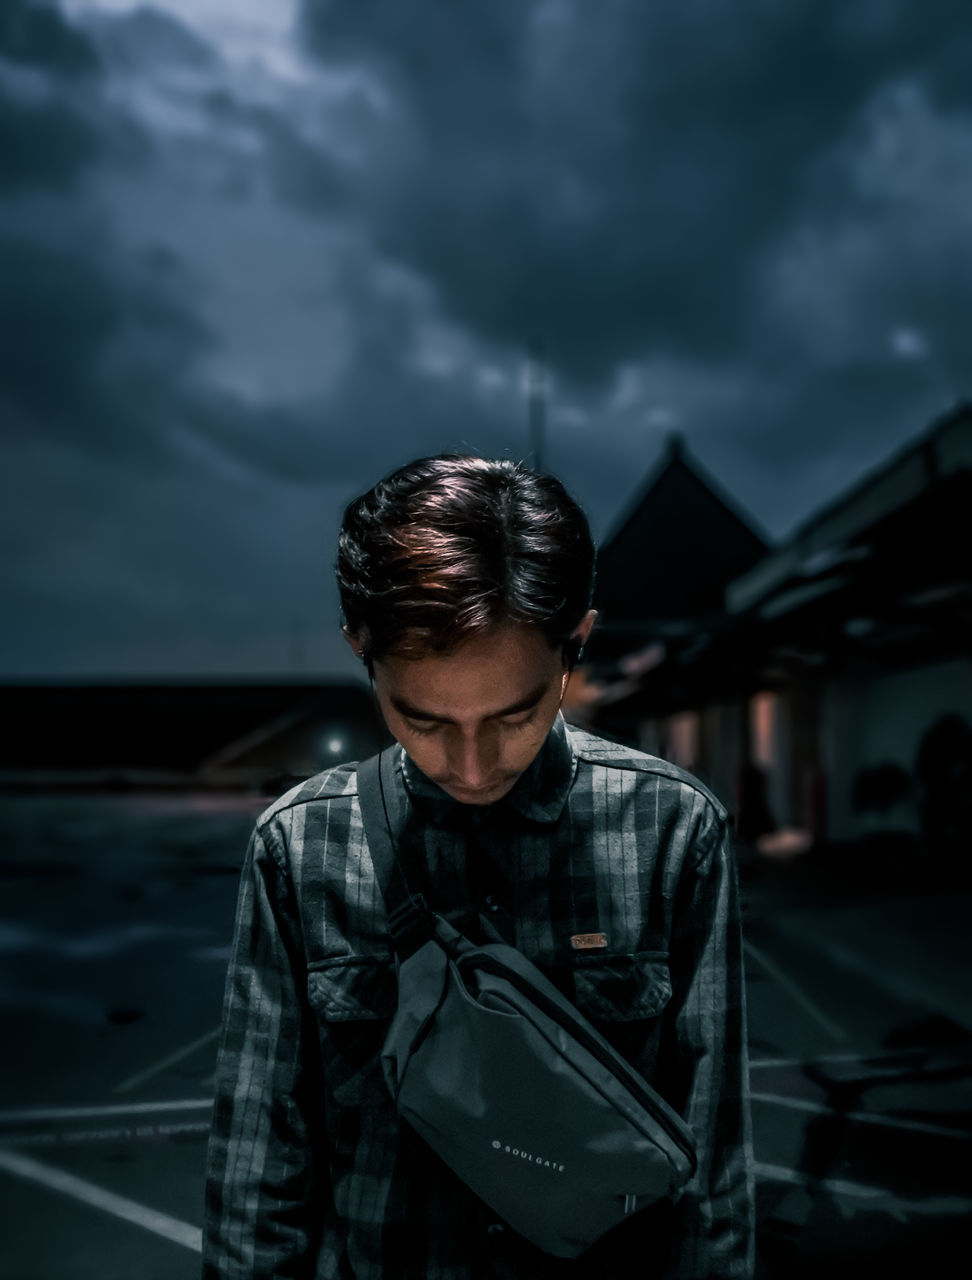 one person, darkness, cloud, sky, black, adult, young adult, architecture, men, night, standing, looking, front view, dark, waist up, focus on foreground, nature, casual clothing, city, screenshot, dusk, overcast, looking down, portrait, serious, outdoors